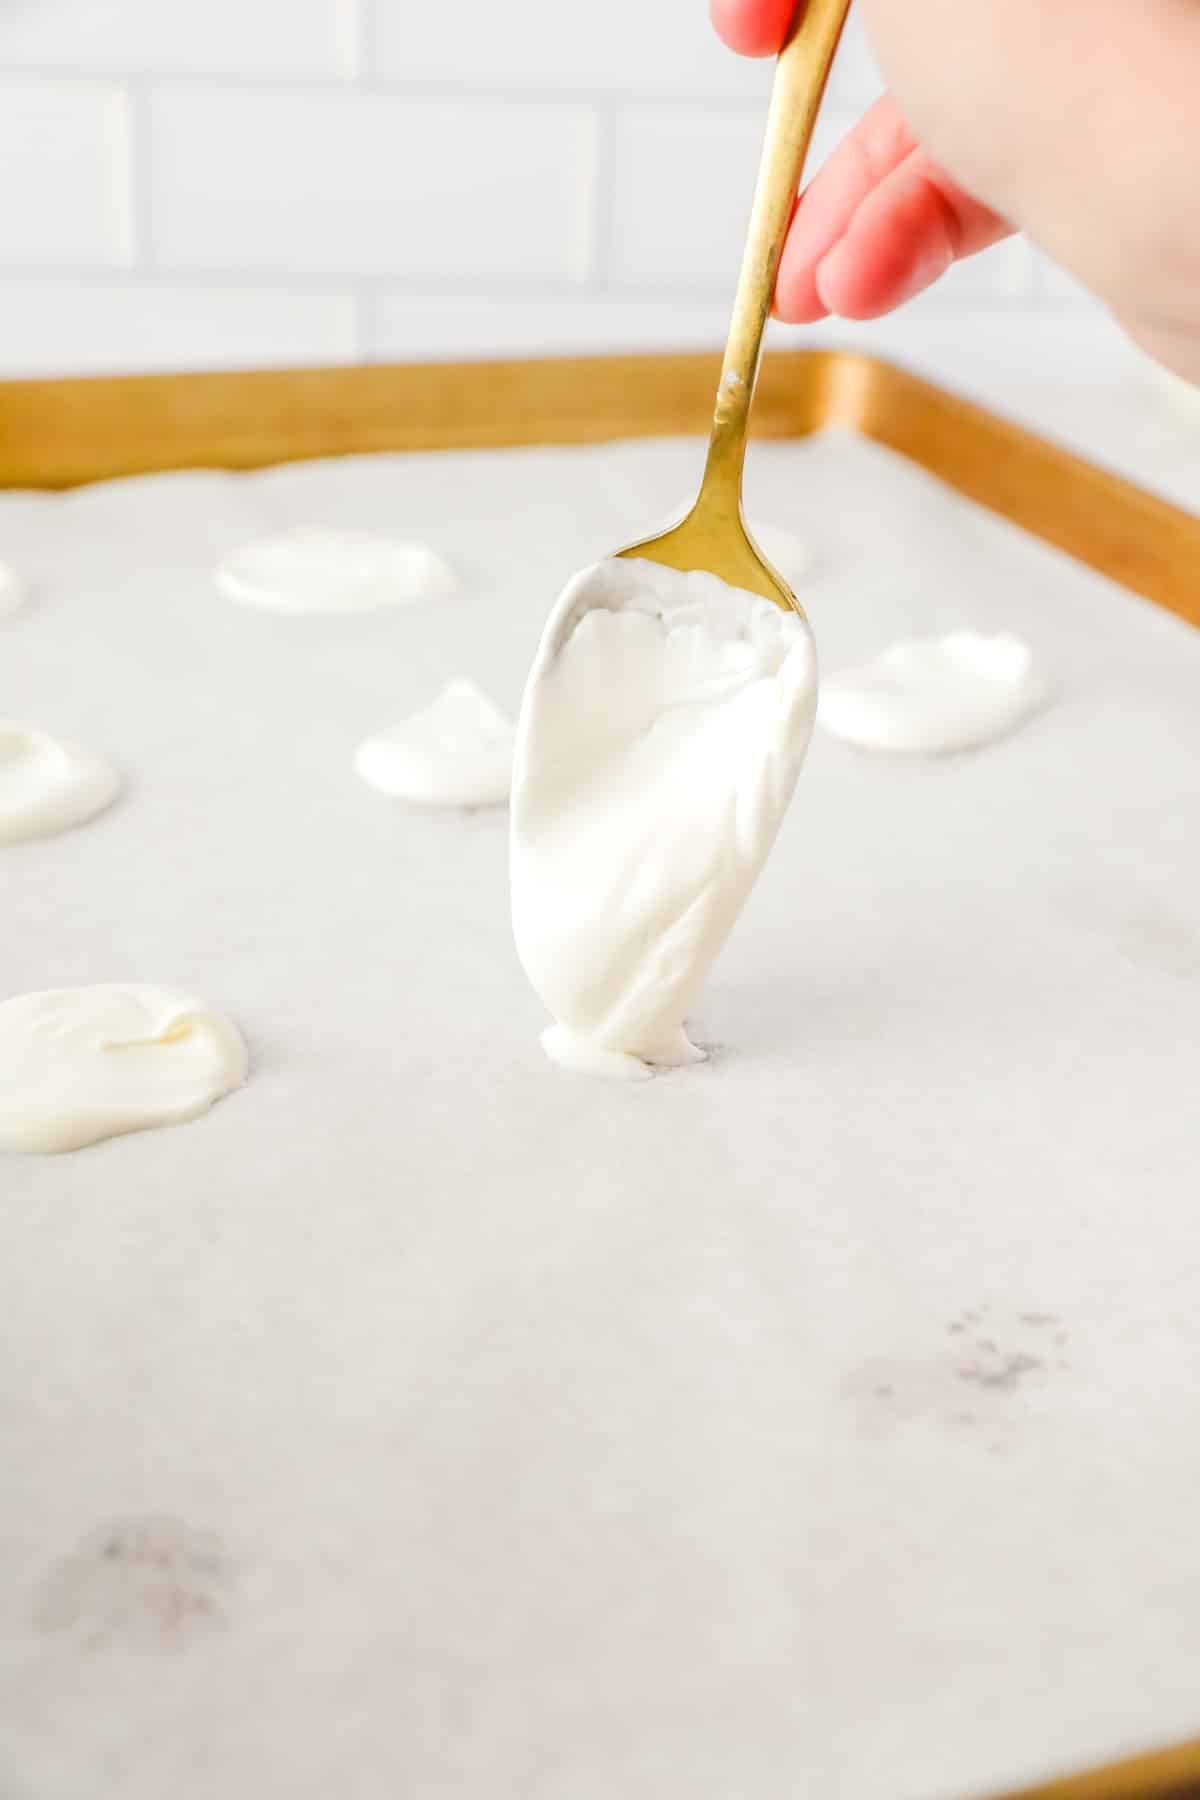 A person's hand using a spoon to spread dollops of white candy melts on a baking sheet.